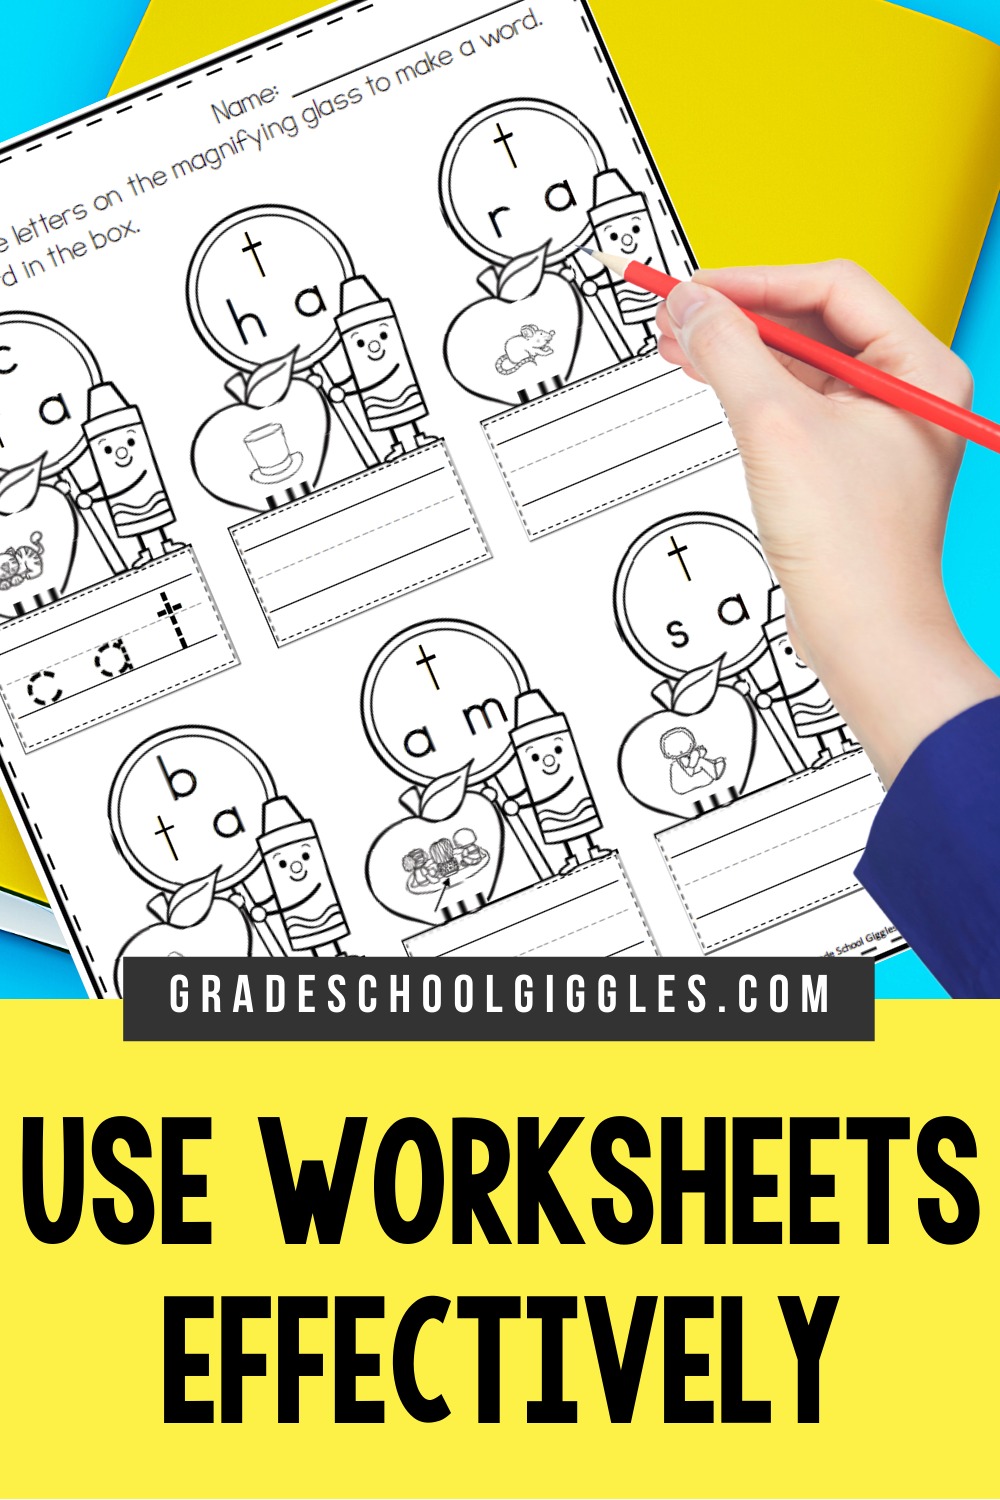 Use worksheets appropriately